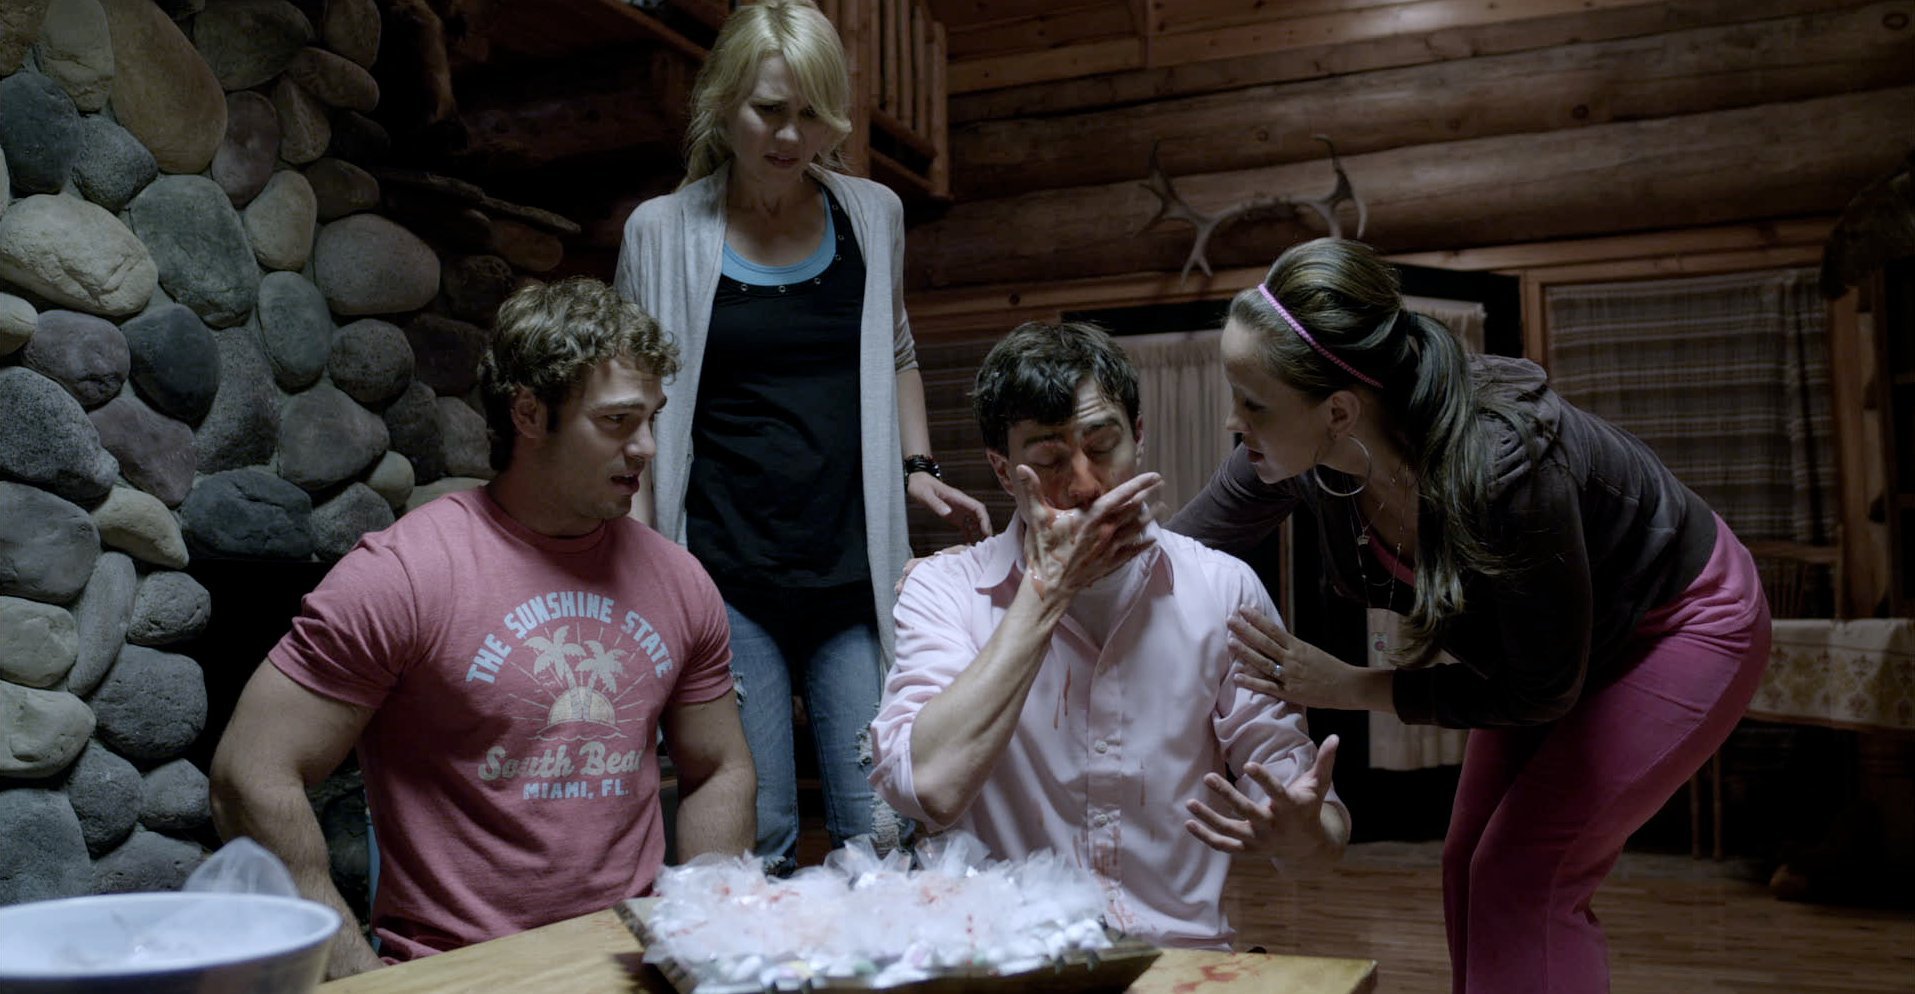 Crystal Lowe, Shawn Roberts, Kristopher Turner and Kristen Hager in A Little Bit Zombie (2012)